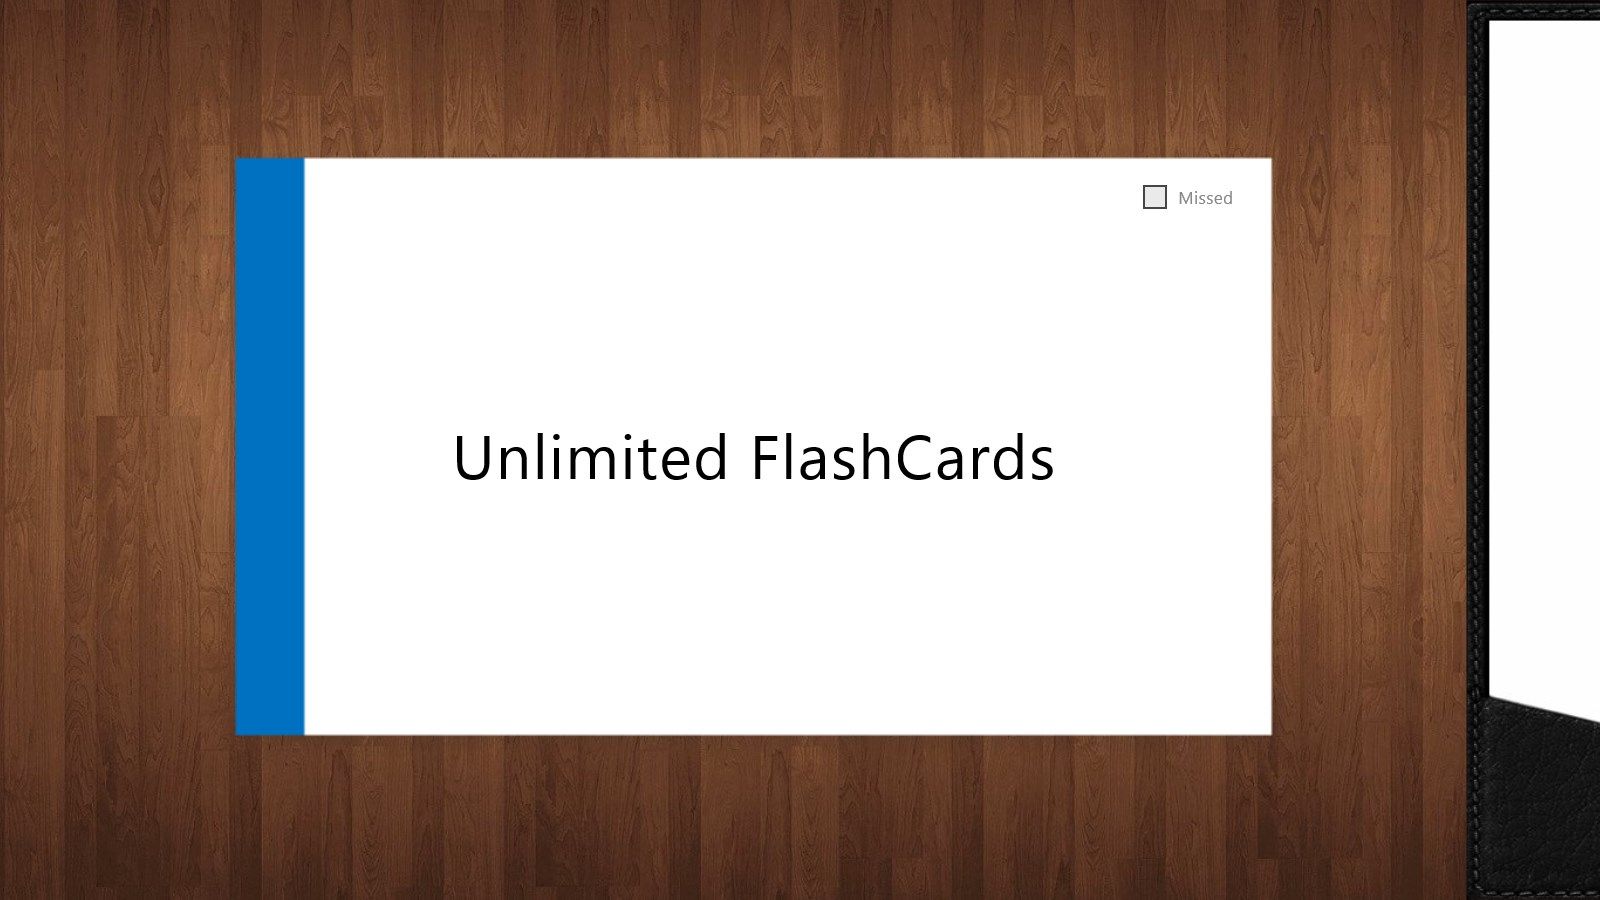 Unlimited flashcards.